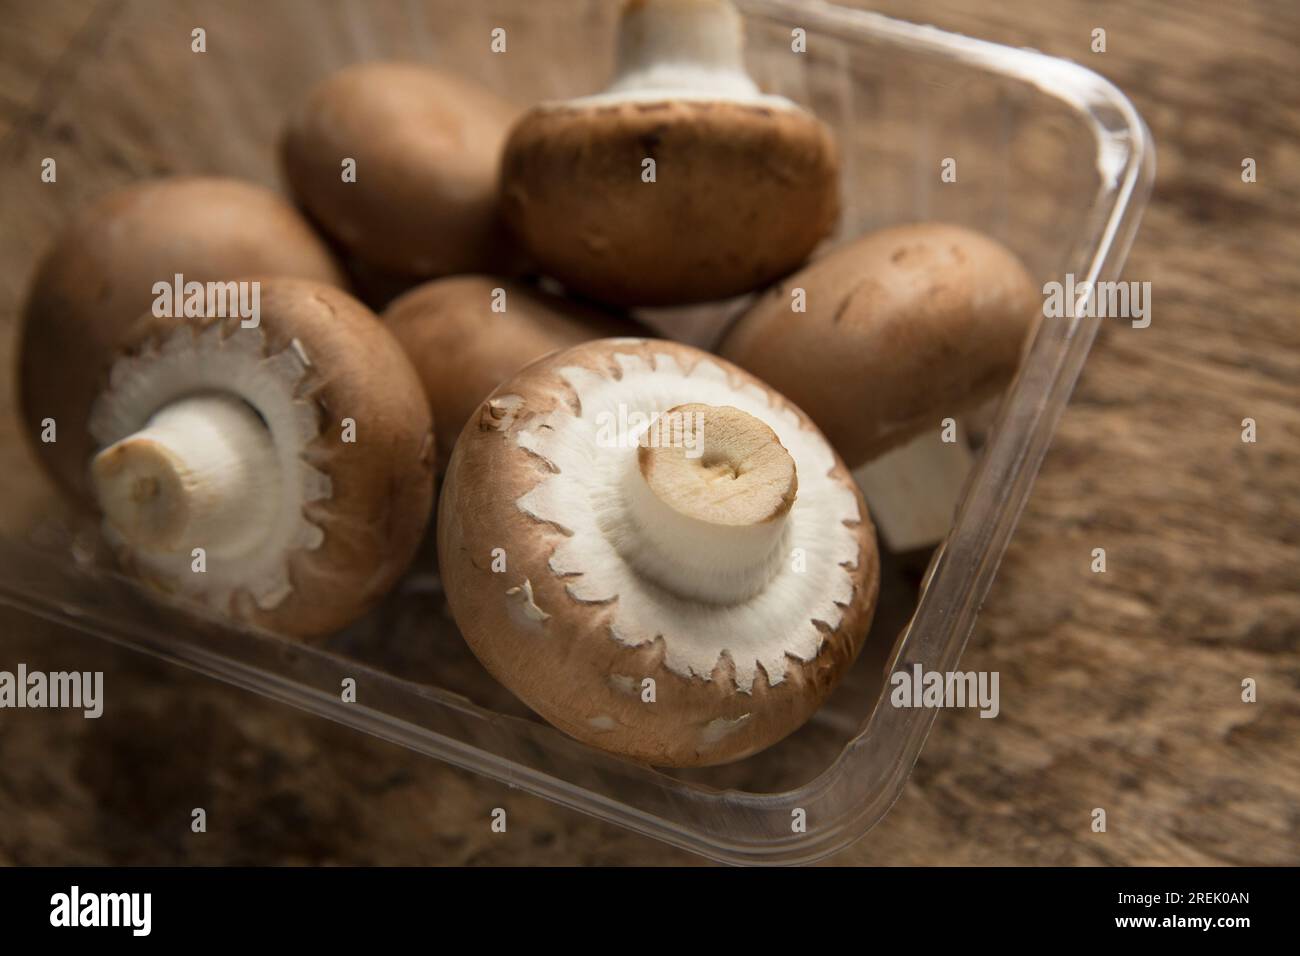 Chestnut mushrooms, grown in Poland and imported into the UK. Stock Photo